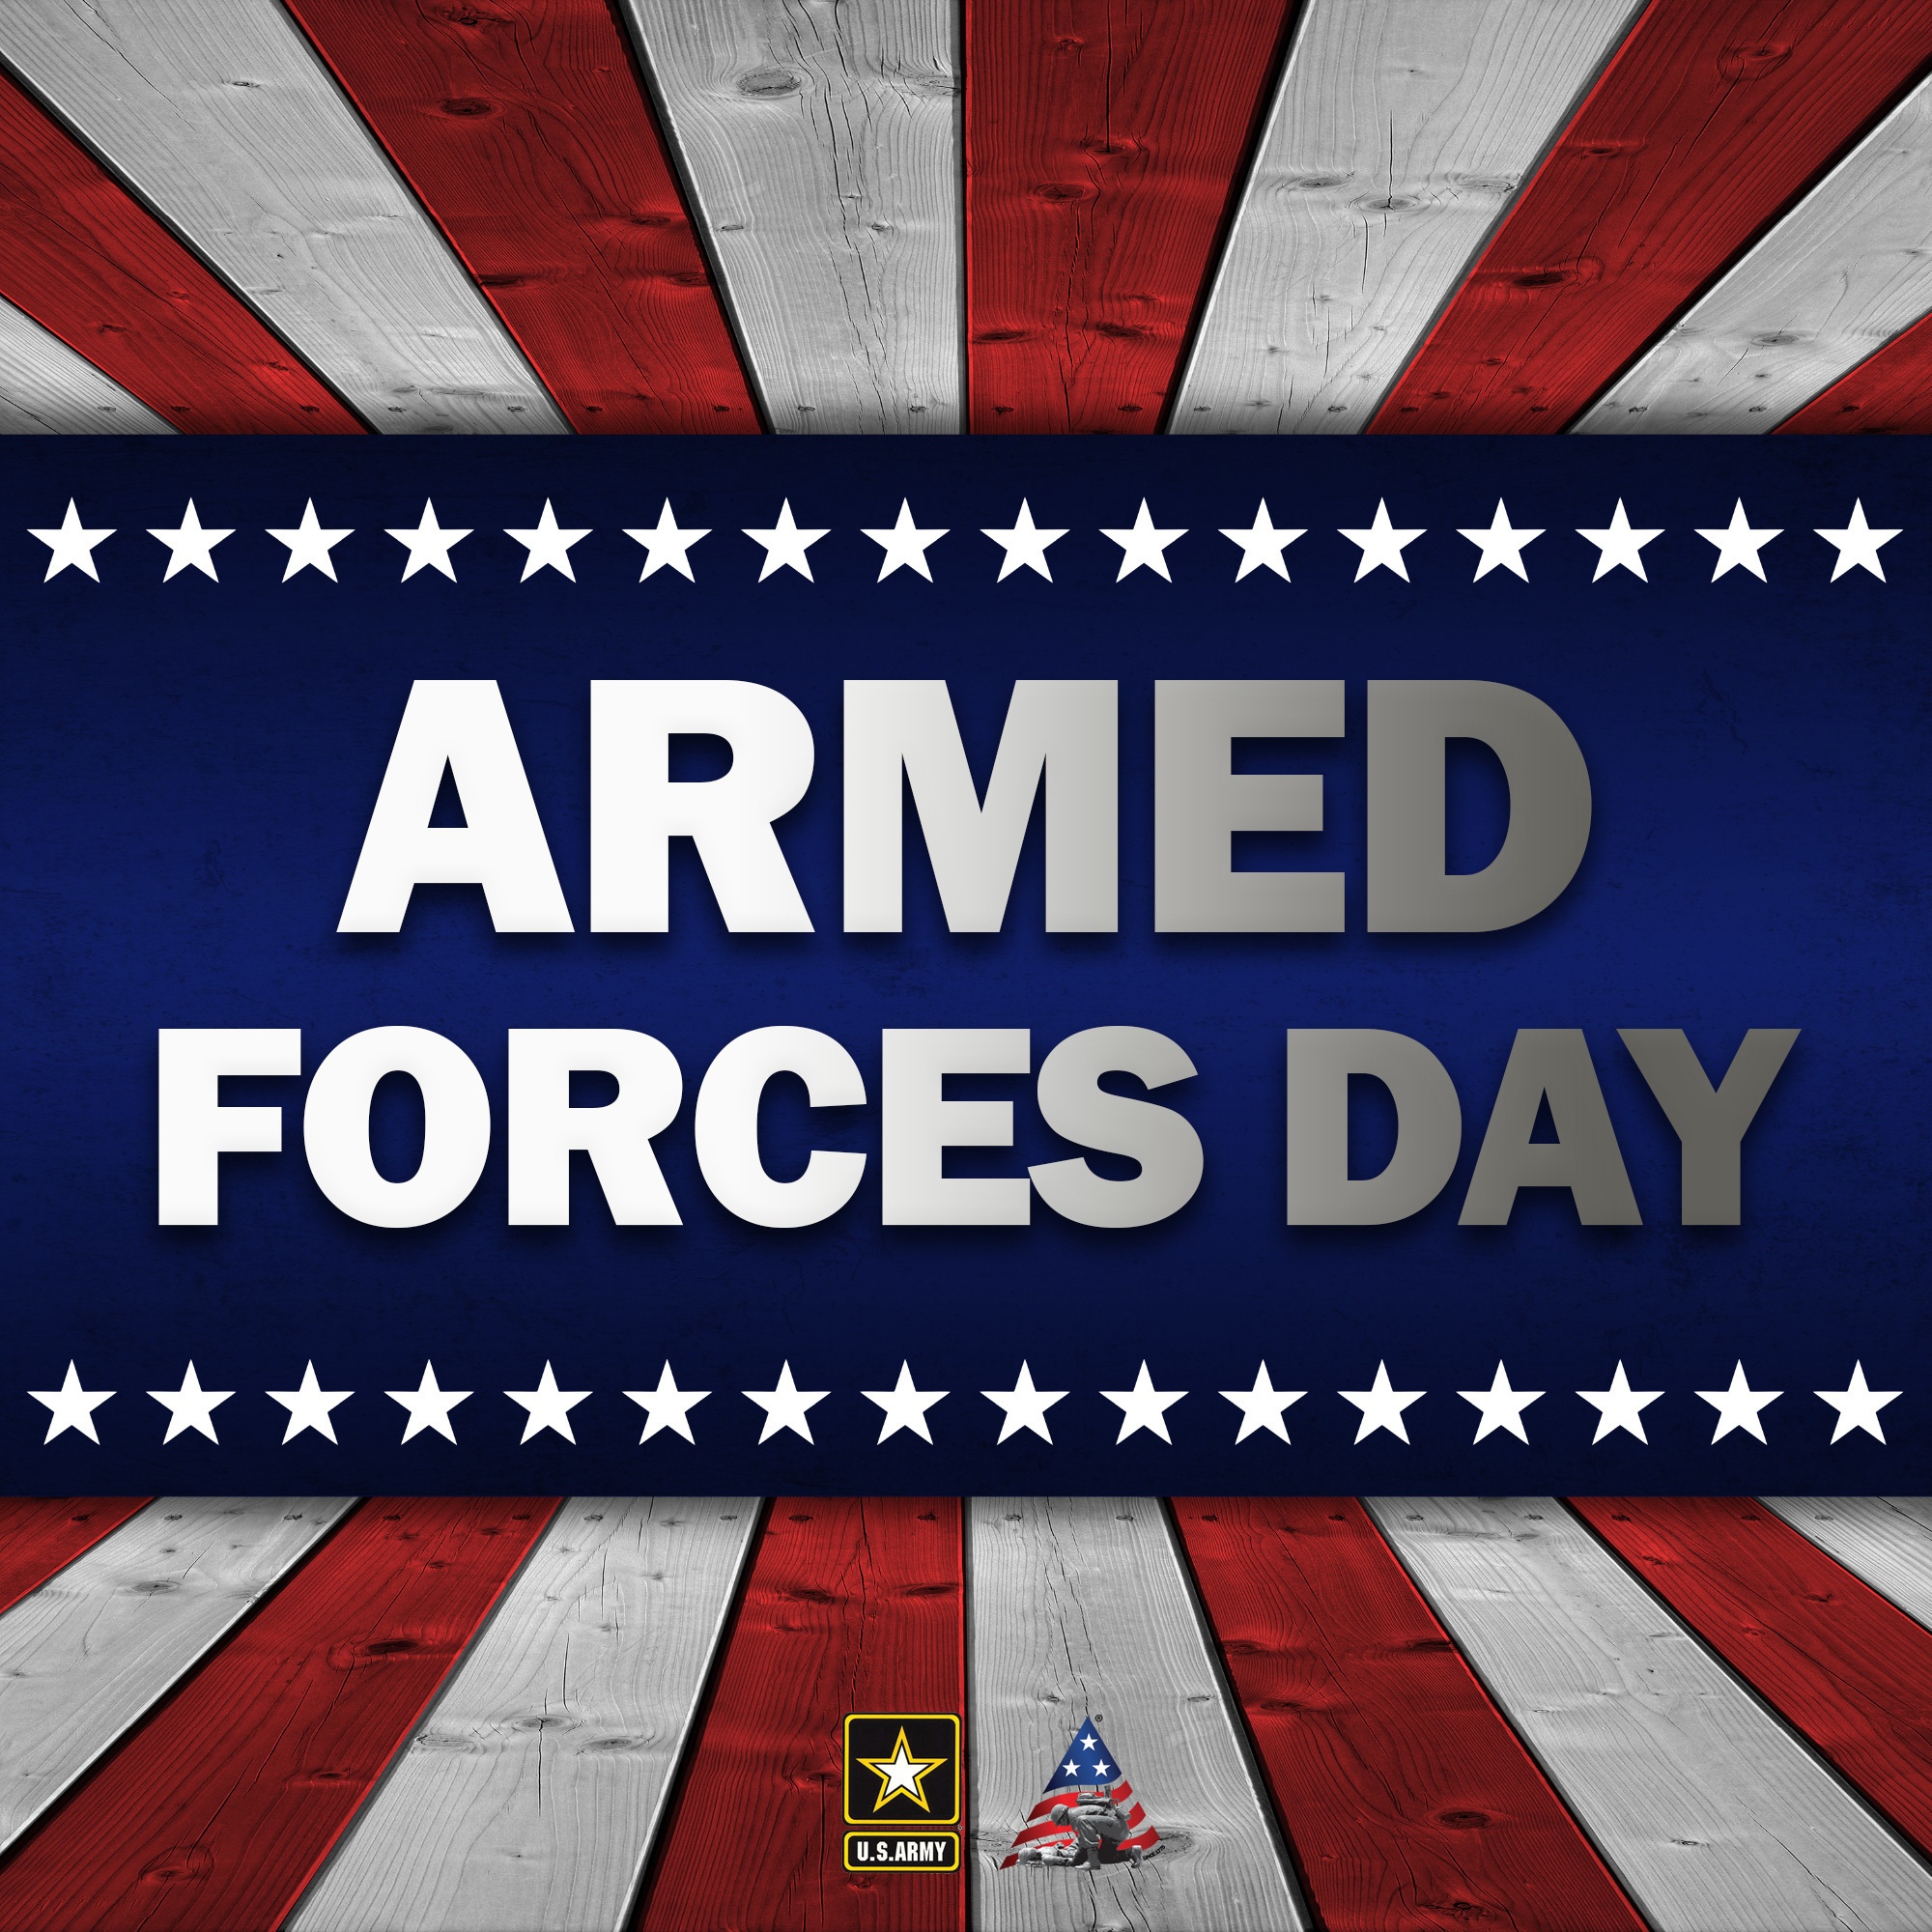 Gallery: Armed Forces Day 2015 - defenceWeb